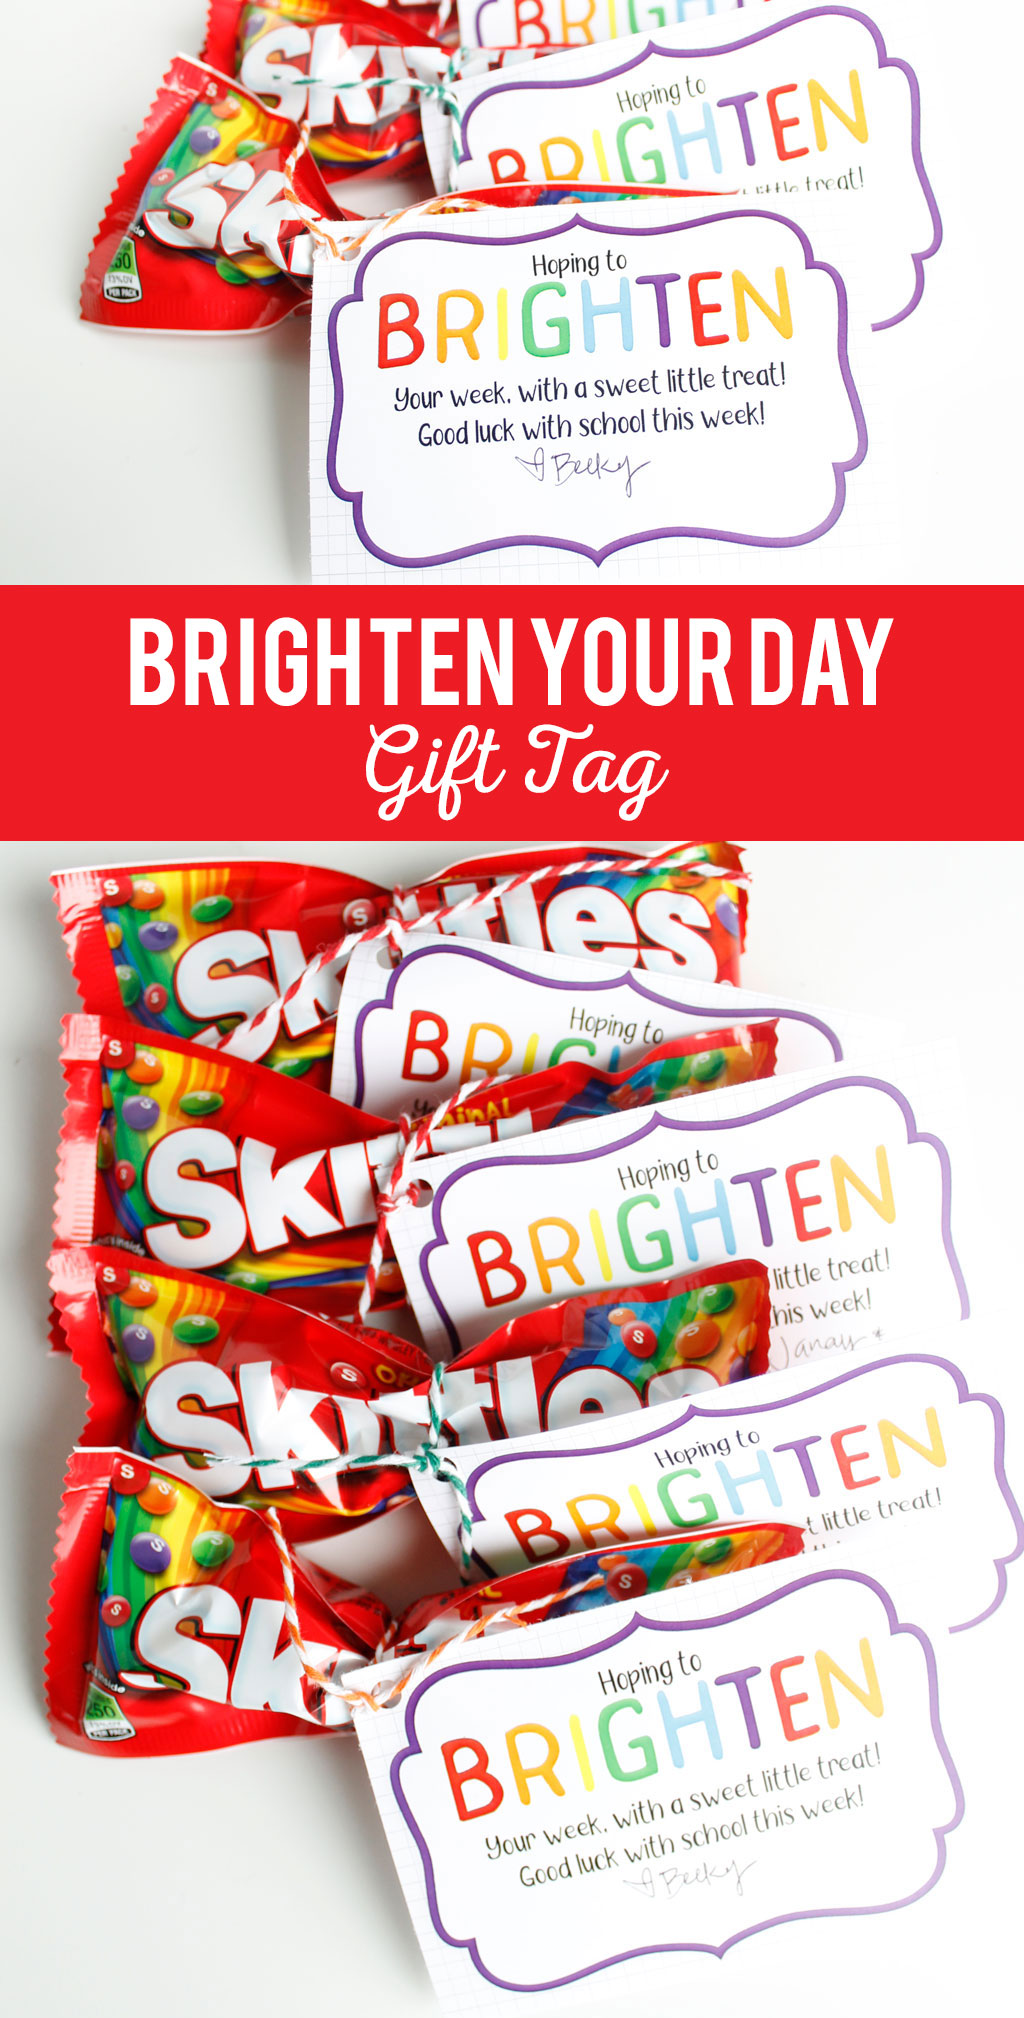 Skittles with rainbow printed gift tag that says Brighten Your Day.